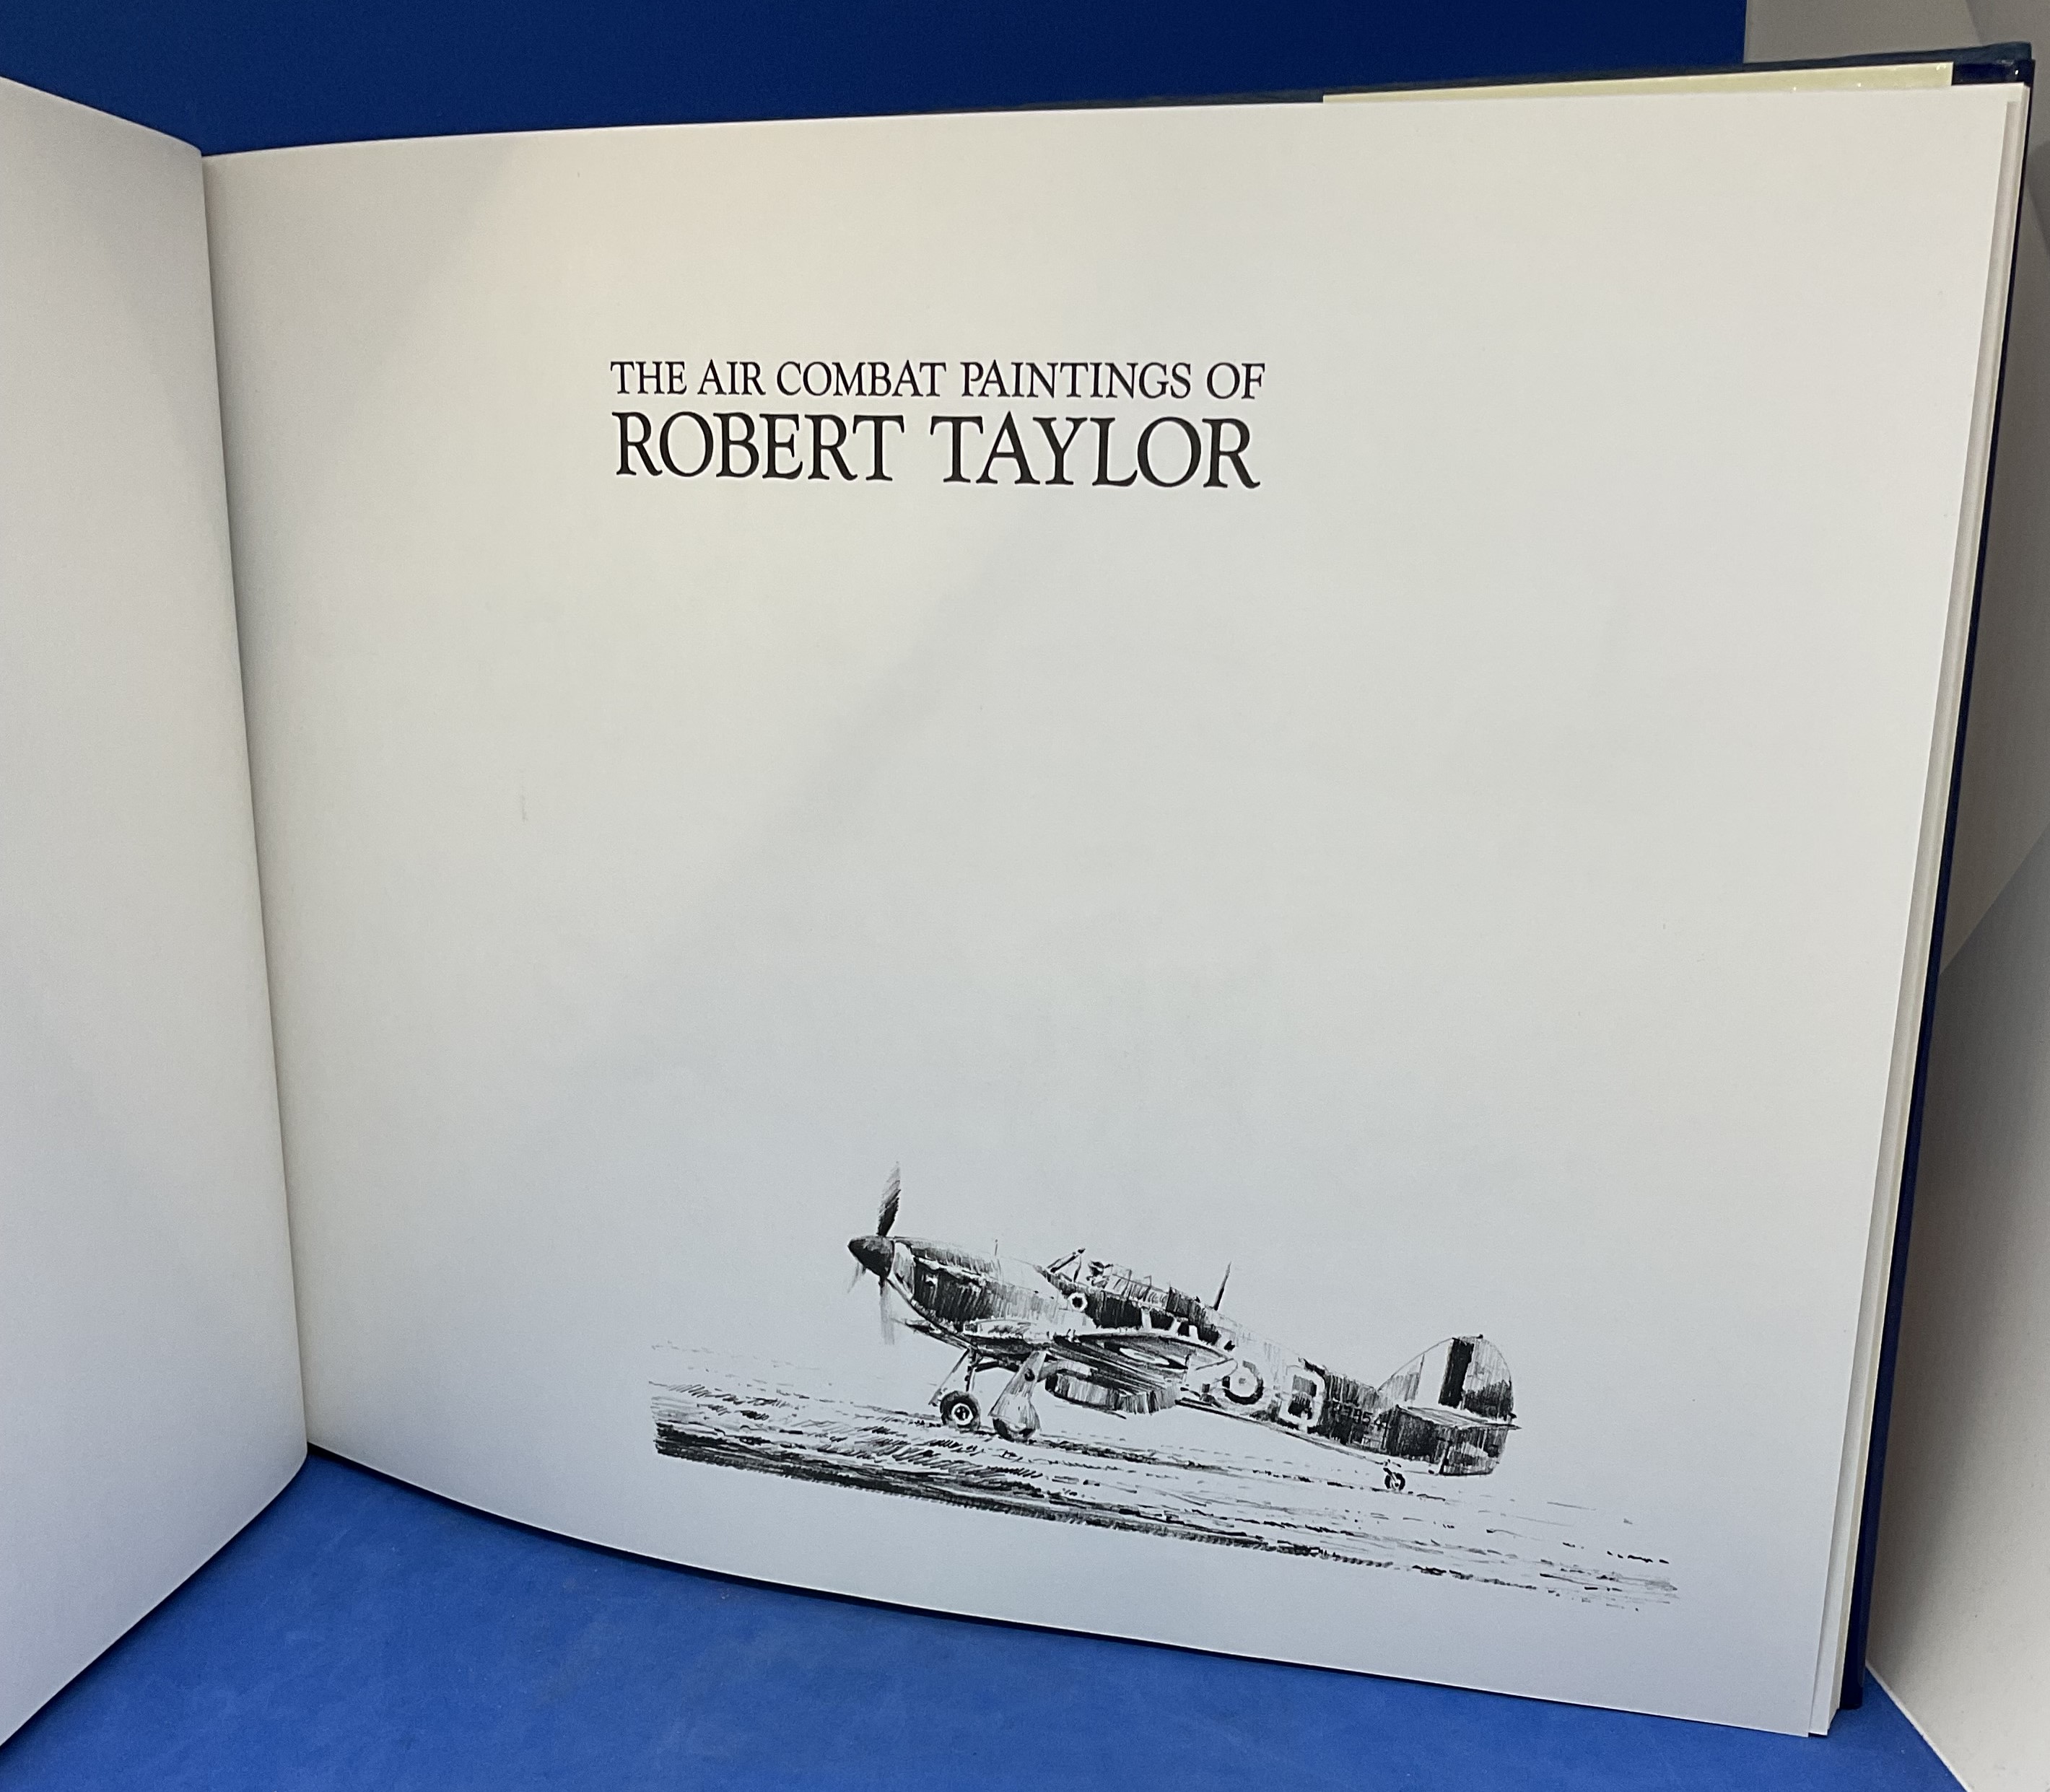 The Air Combat Paintings of Robert Taylor by Robert Weston and Robert Taylor. 4th Impression 1990. - Image 2 of 2